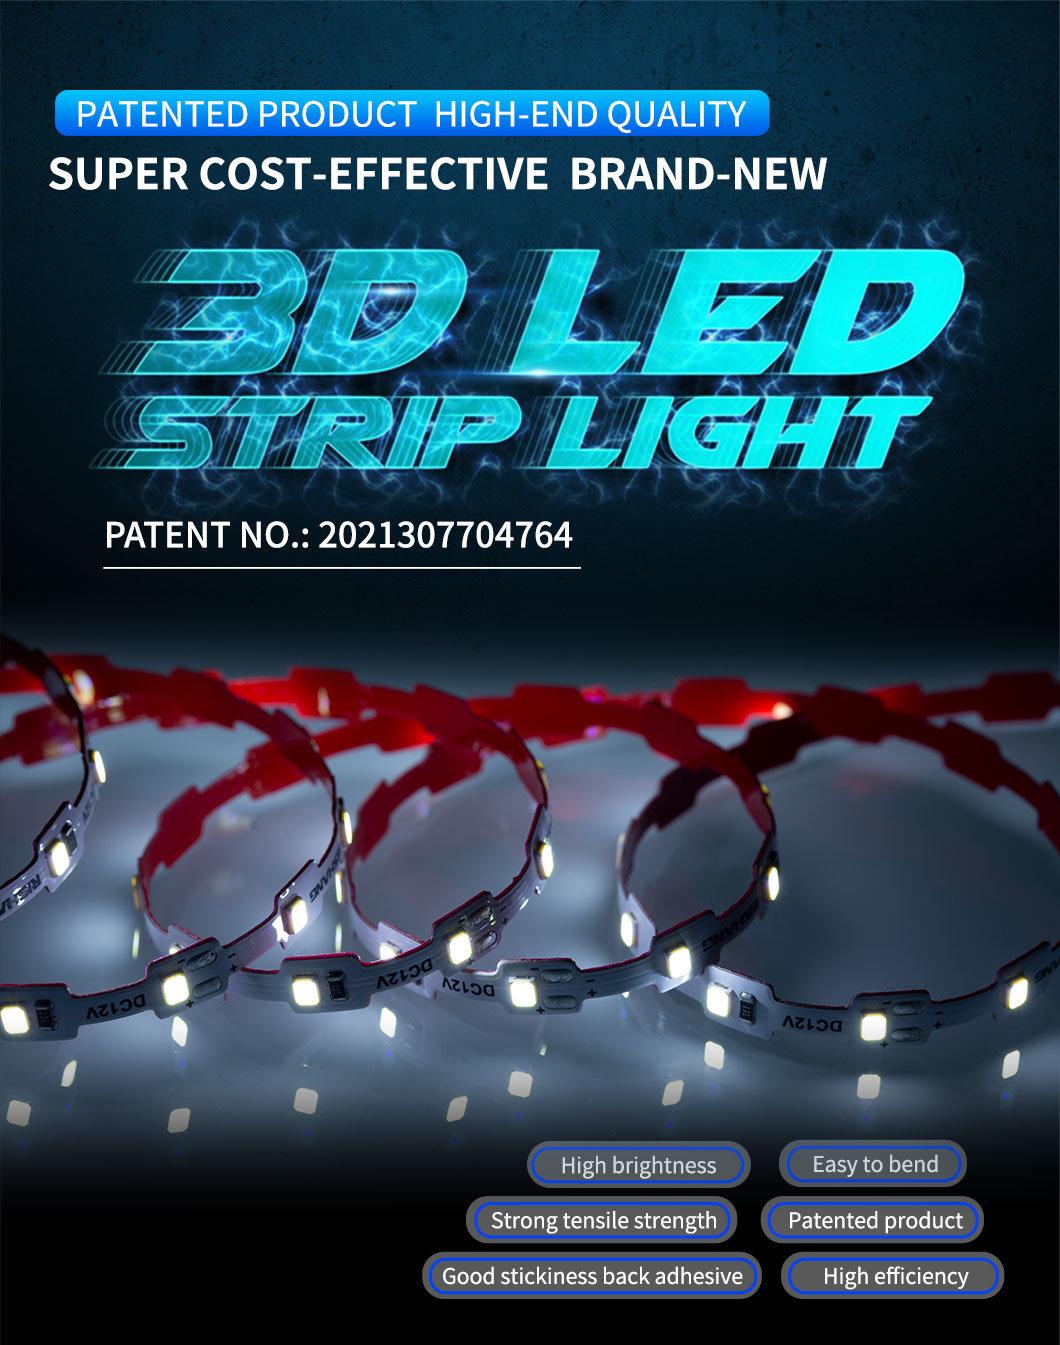 Per Cutting Mark More Stable Quality 12VDC 6W/M 3D Flexible LED Strips